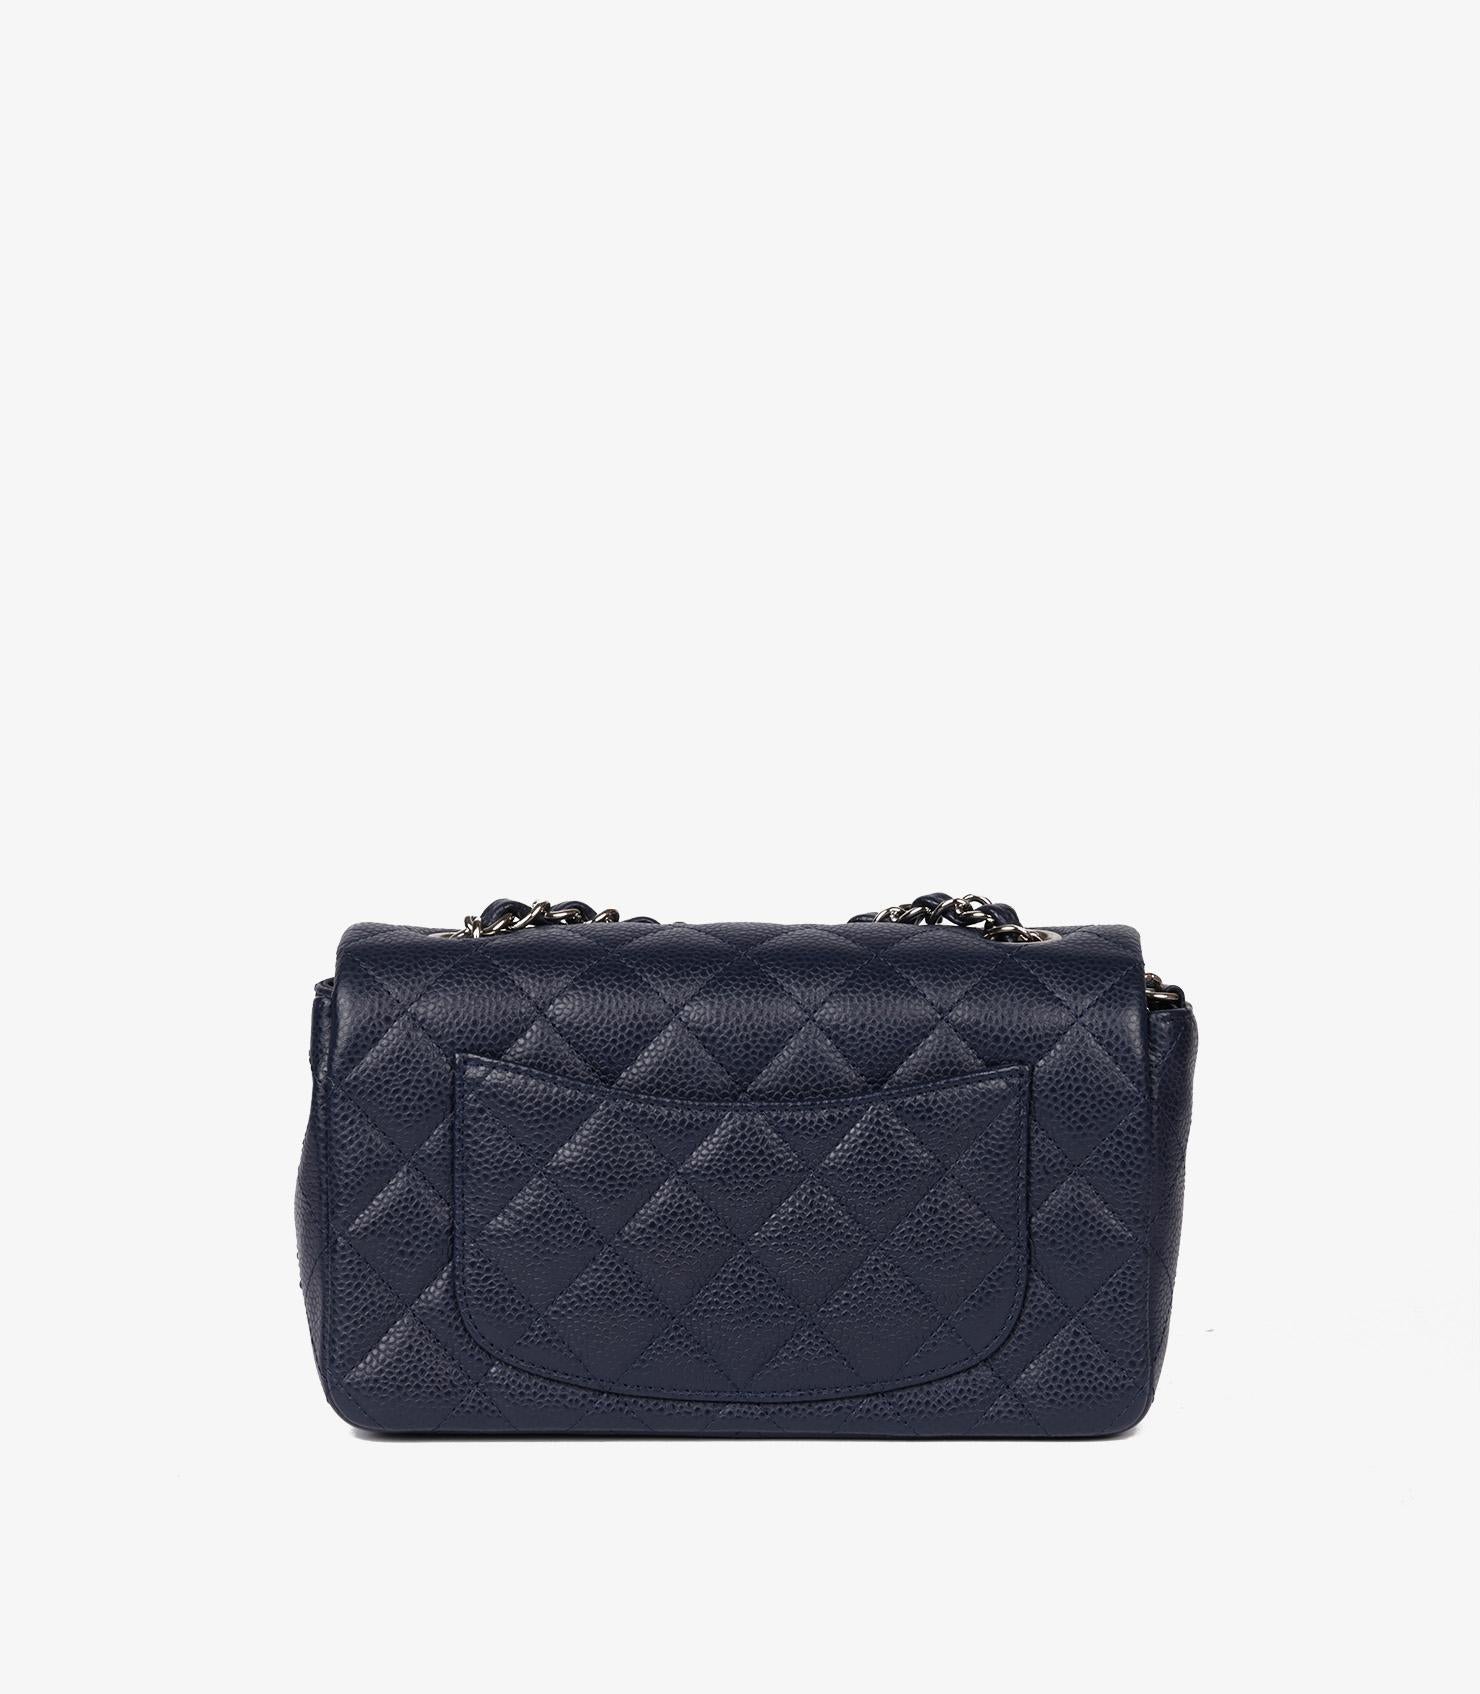 Chanel Navy Blue Quilted Caviar Leather Rectangular Mini Flap Bag 2